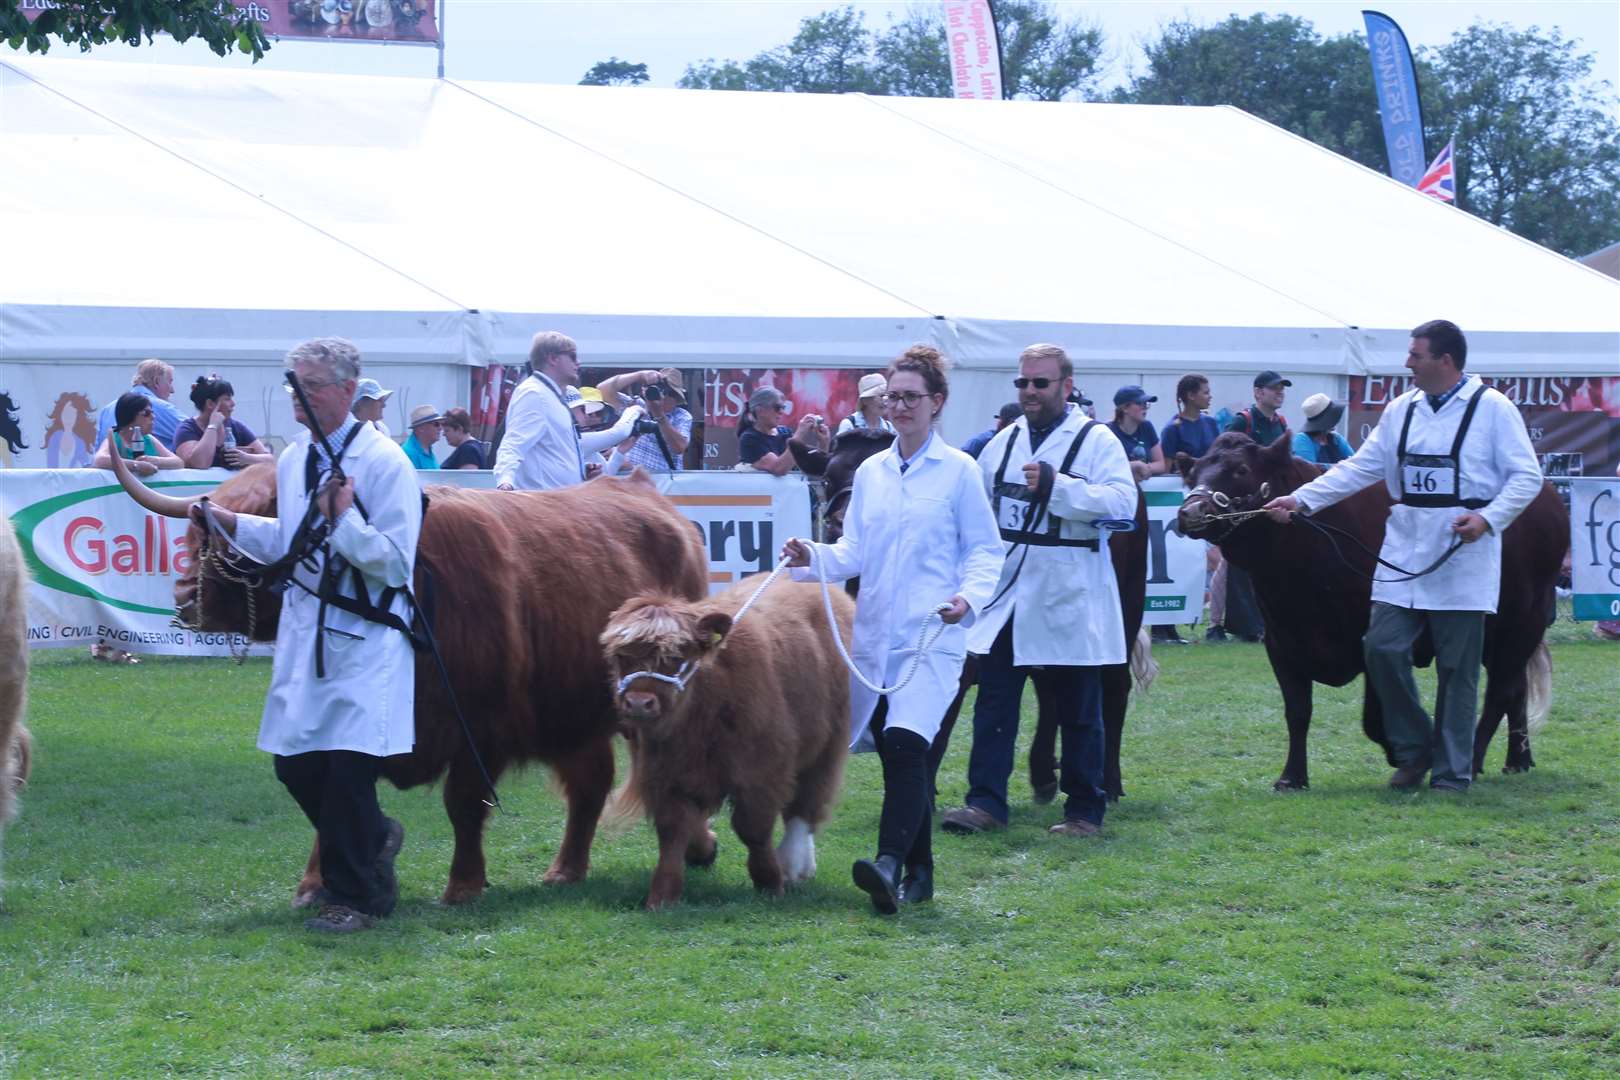 Farmers on parade at the Kent County Show